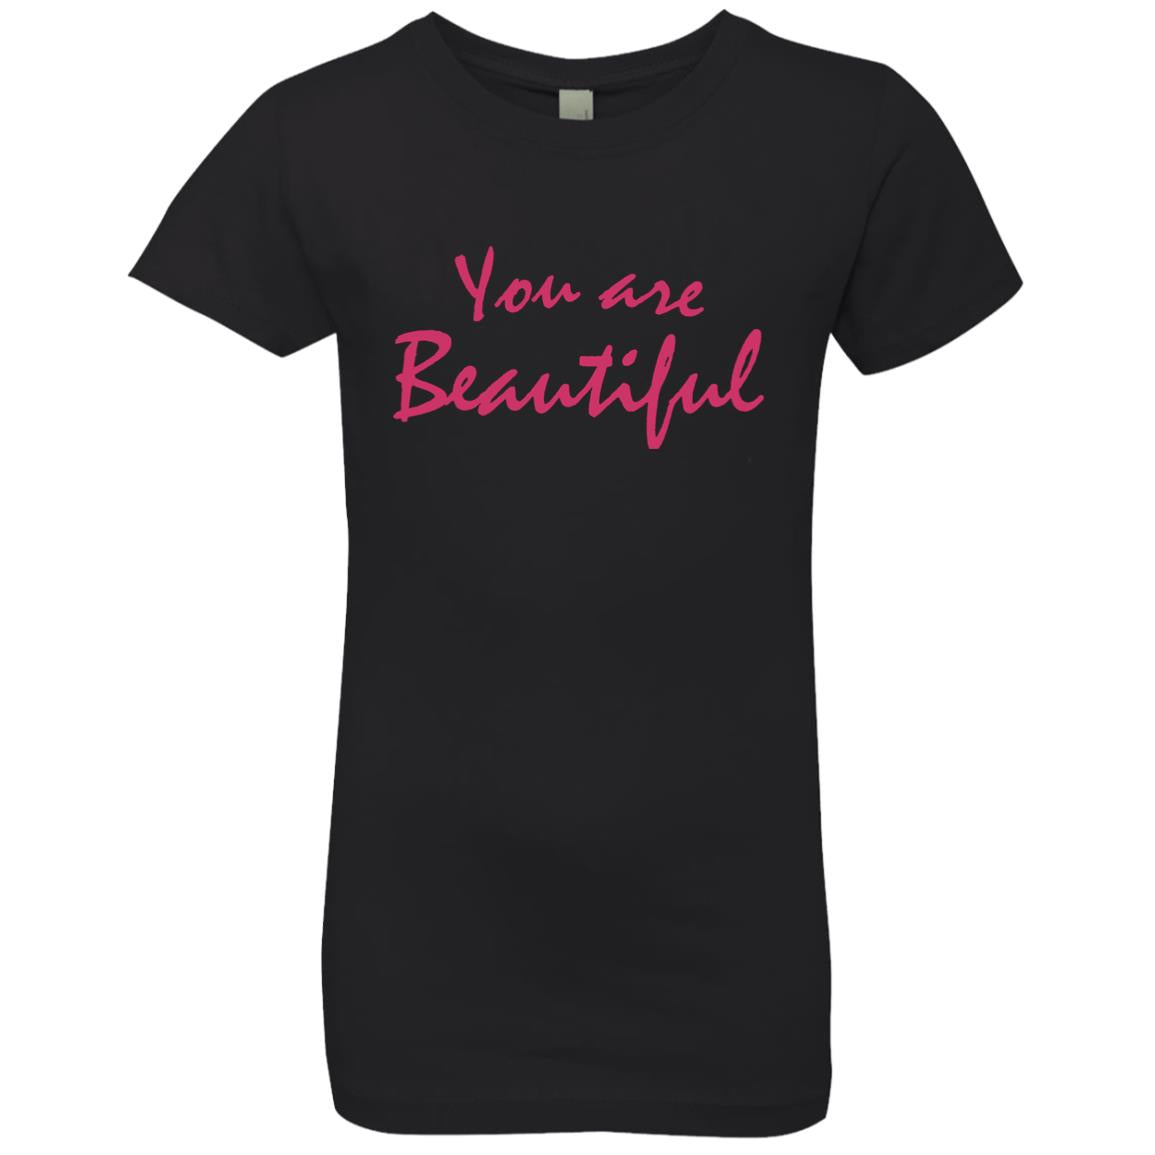 You Are Beautiful | Youth Girls' Style T-Shirt